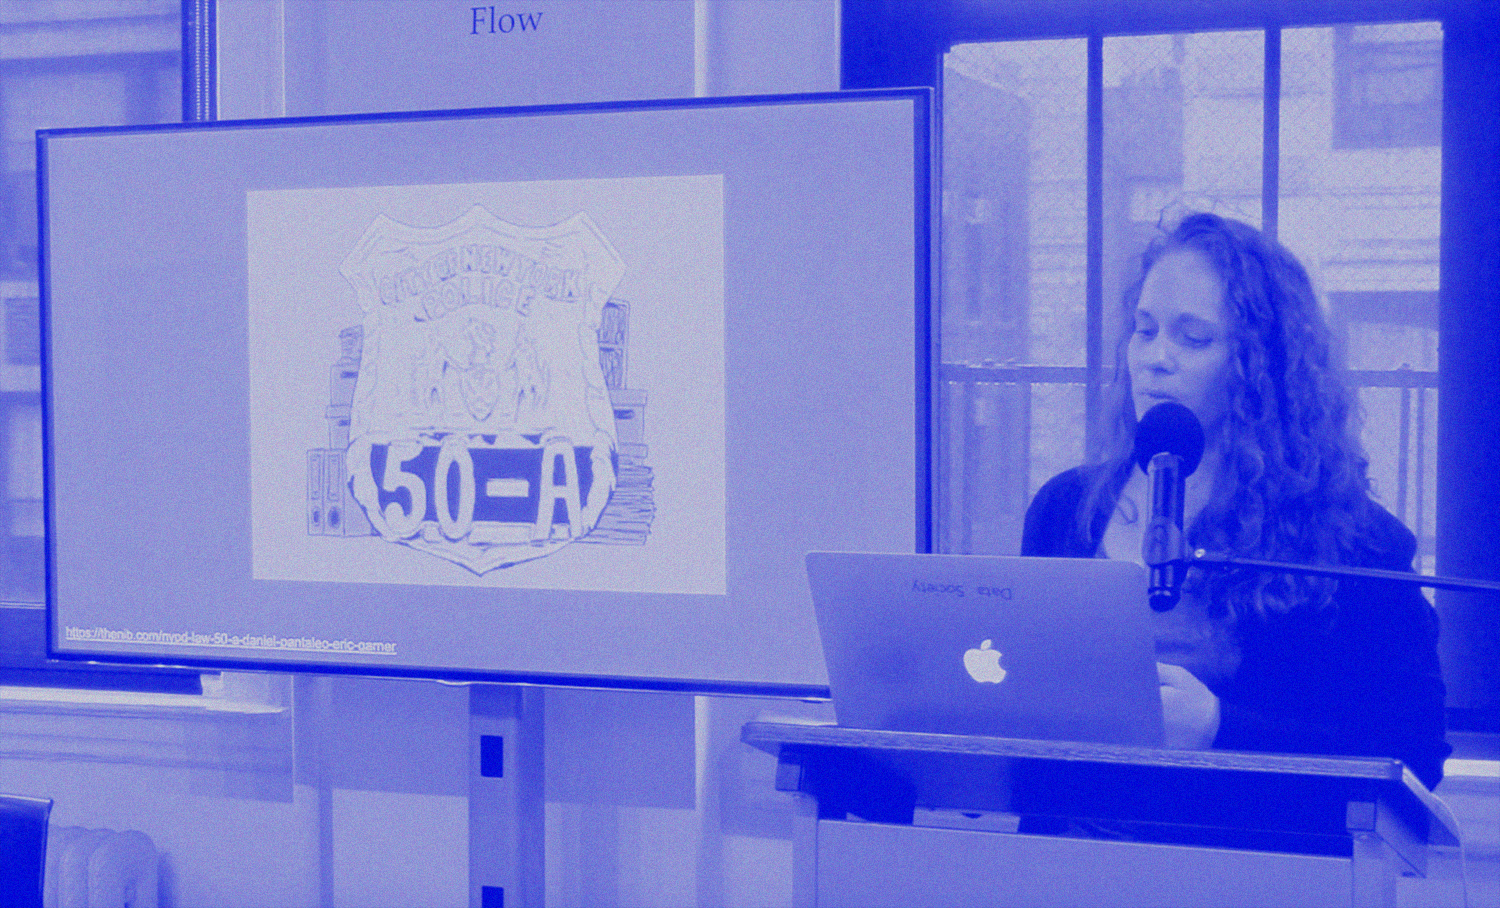 photo of person with long hair speaking into a microphone next to a screen with a large illustration of an NYPD badge with the word 